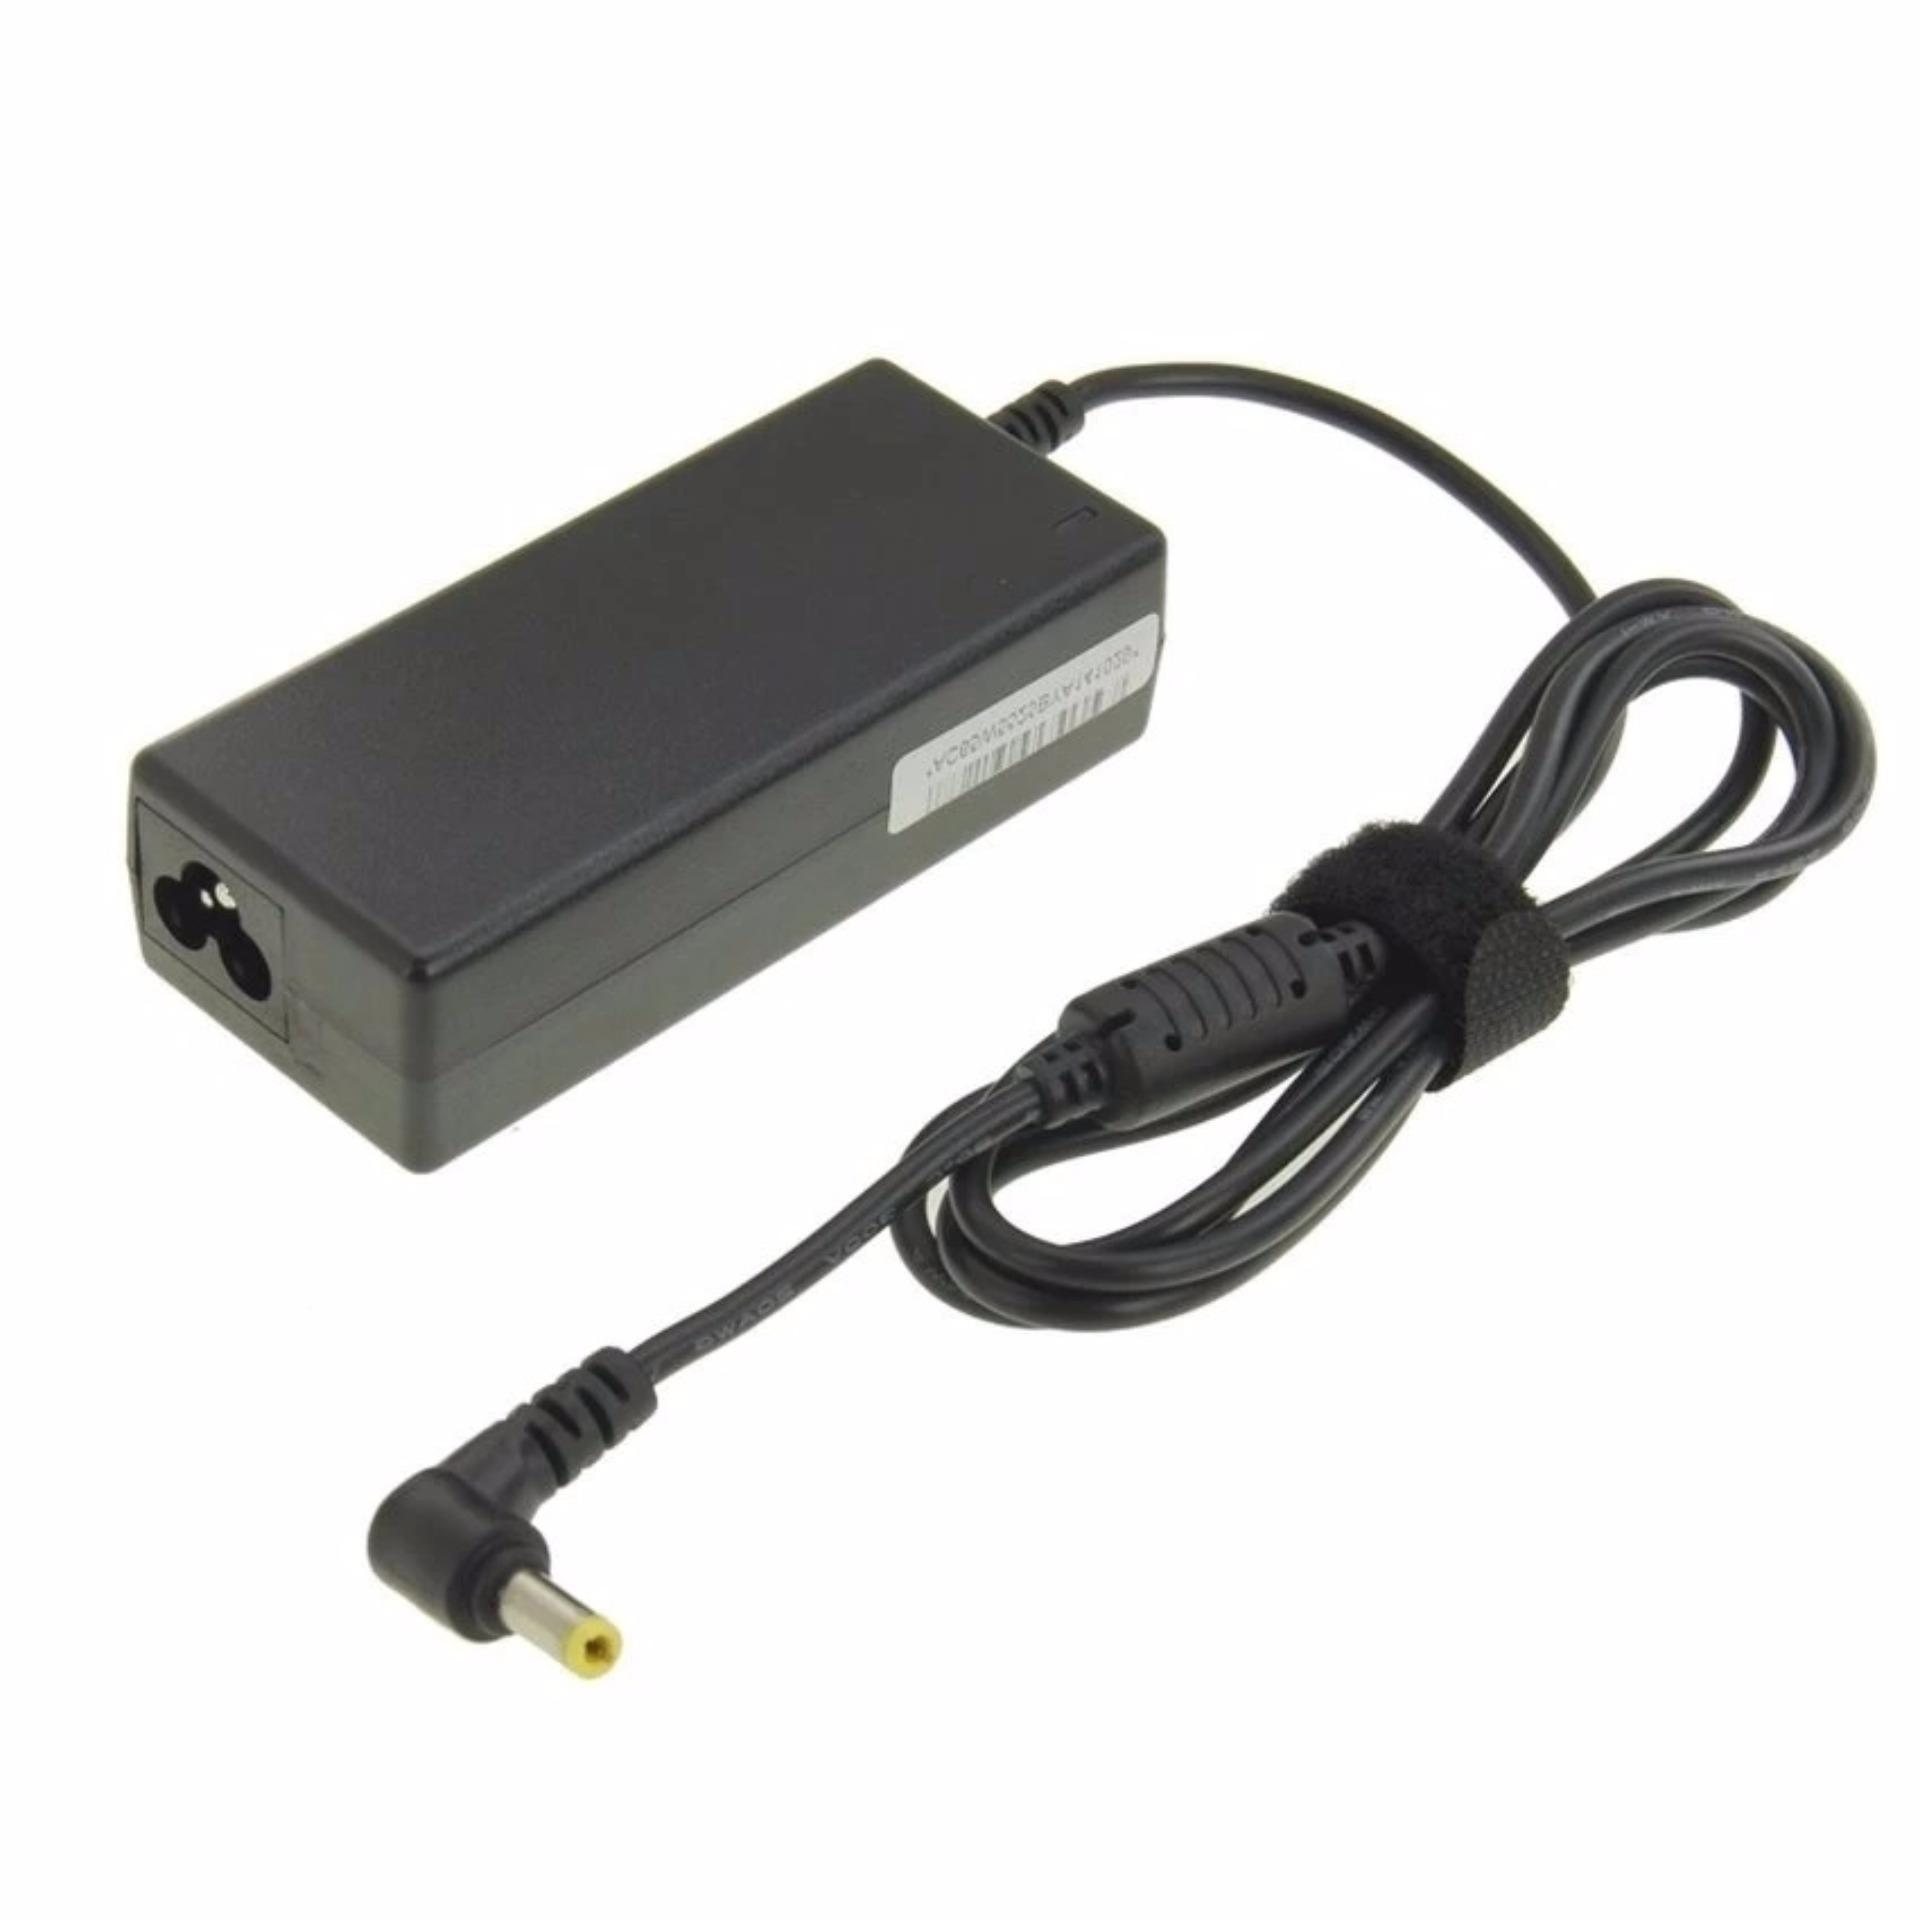 Sạc 19V 3.42A Mini AC Adapter for Acer Laptop, Output Tips: 5.5mm x 2.5mm